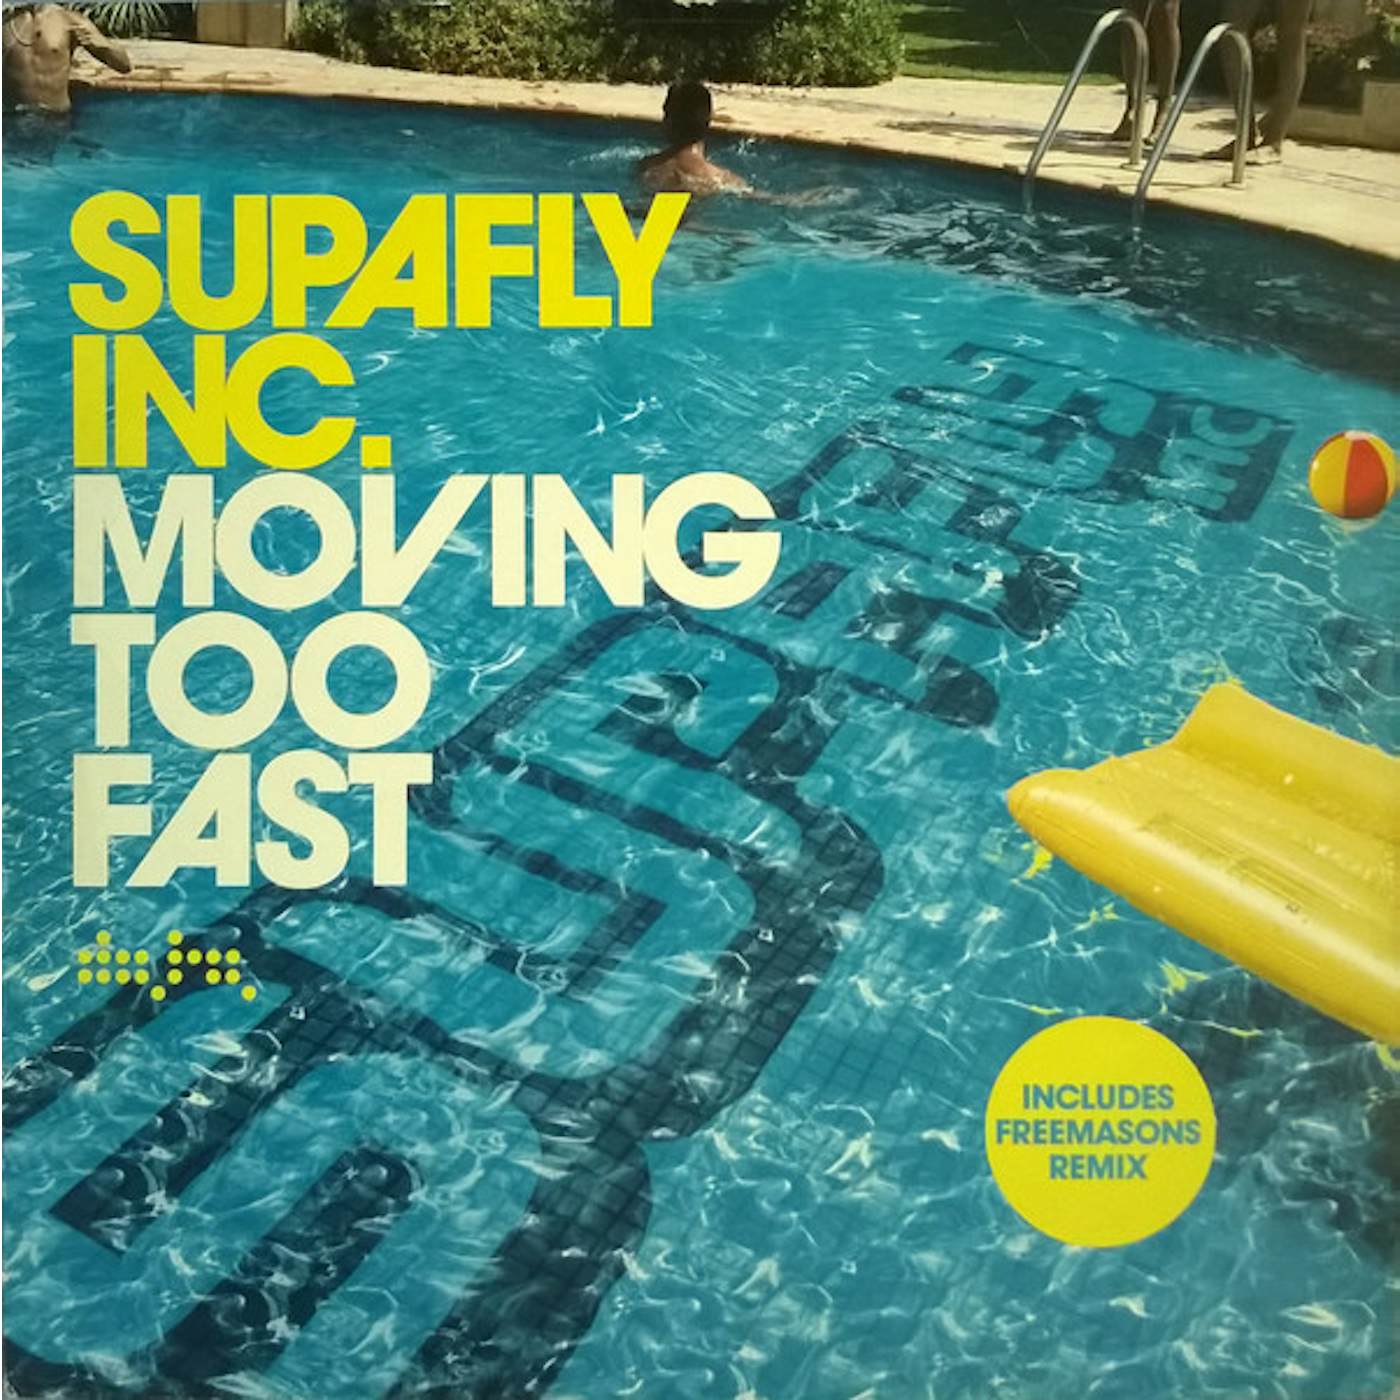 Supafly MOVING TOO FAST Vinyl Record - UK Release